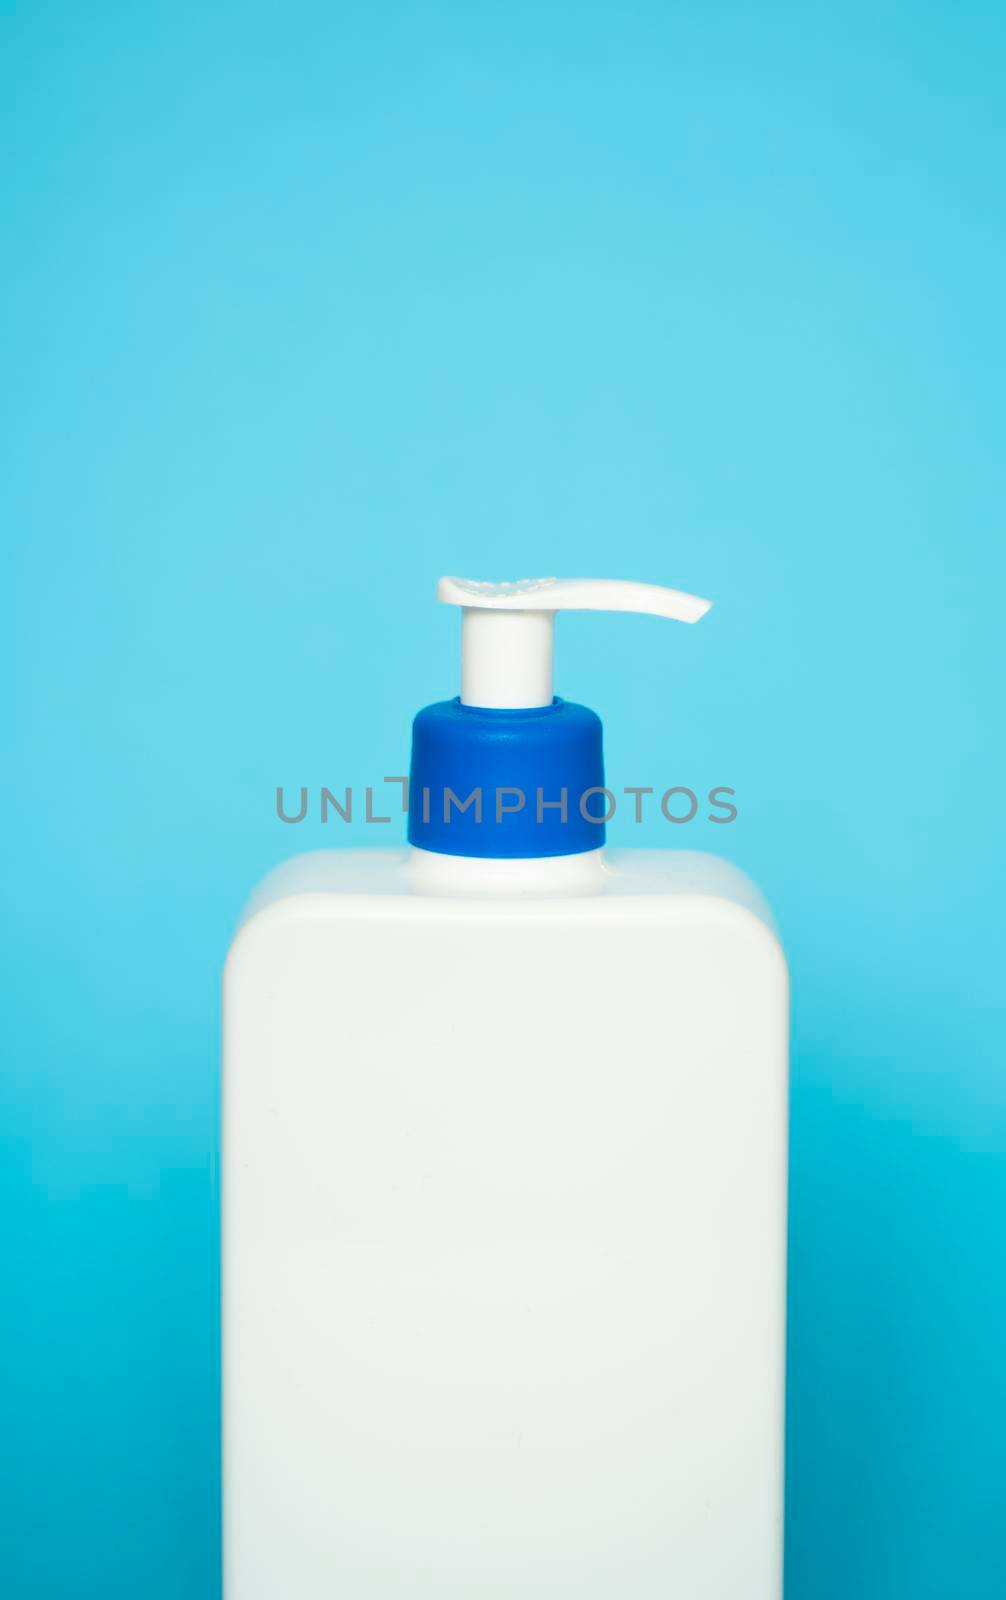 Liquid container for gel, lotion, cream, shampoo, bath foam. Cosmetic plastic bottle with blue dispenser pump on blue background. Cosmetic packaging mockup with copy space